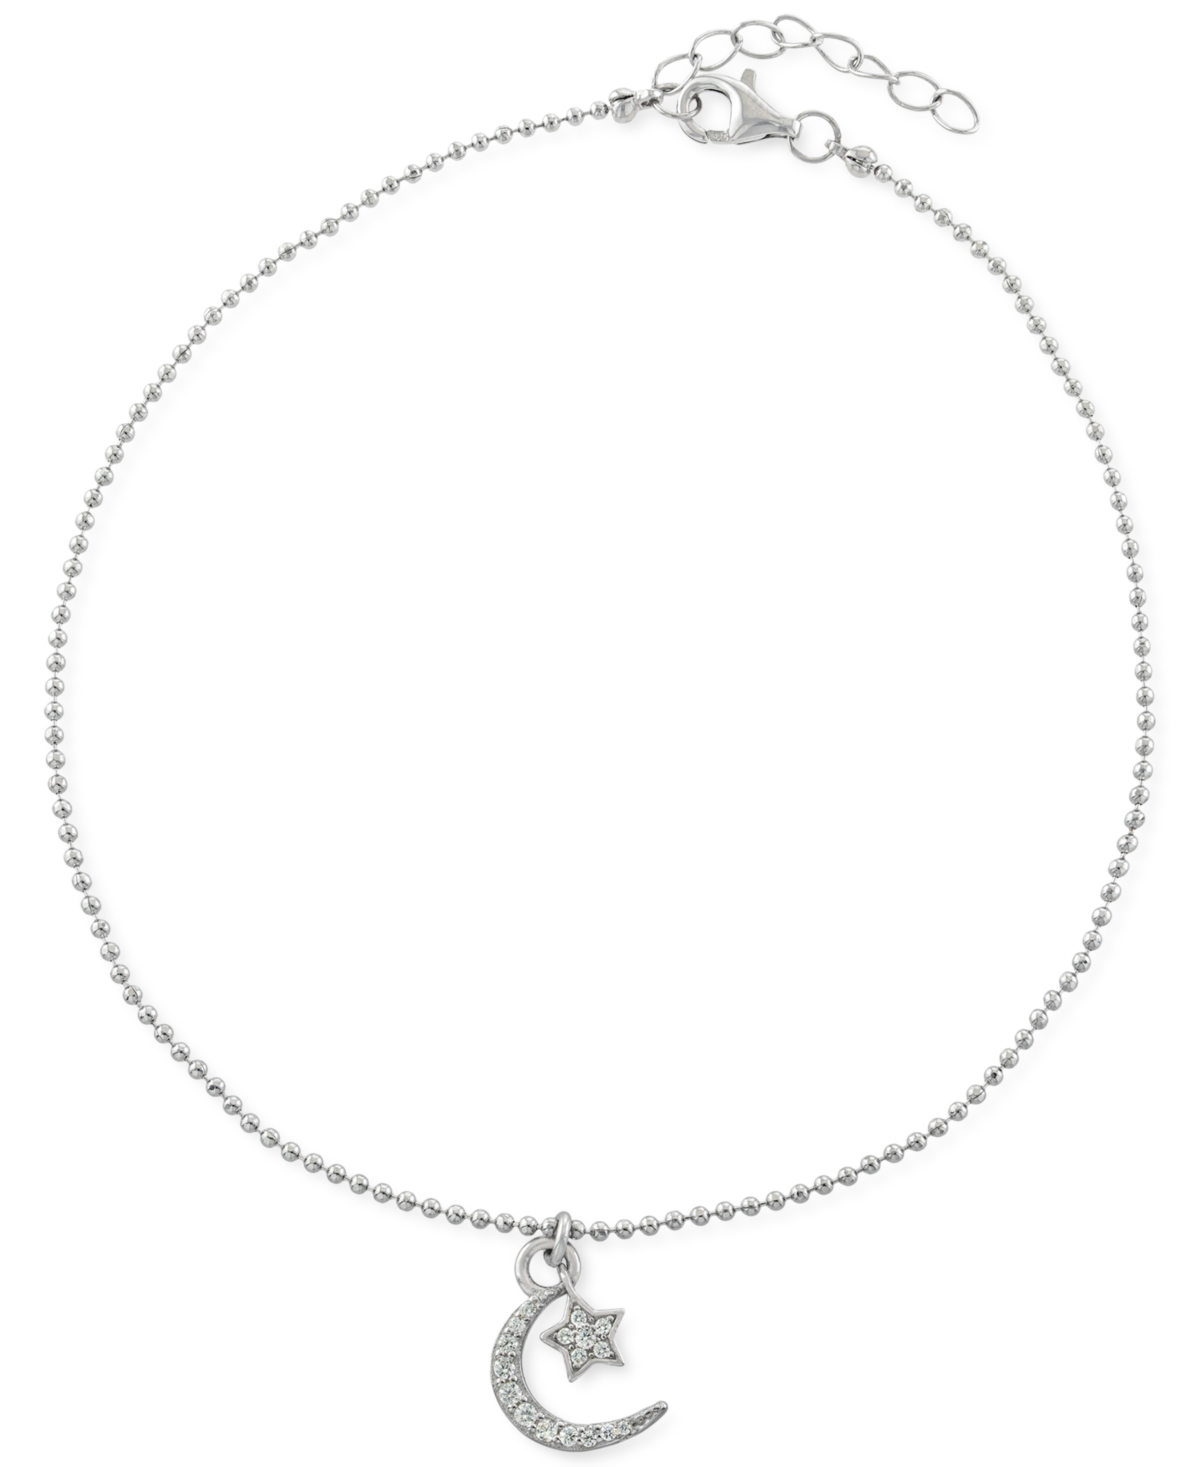 Cubic Zirconia Moon & Star Charm Ankle Bracelet in Sterling Silver, Created for Macy's - Sterling Silver